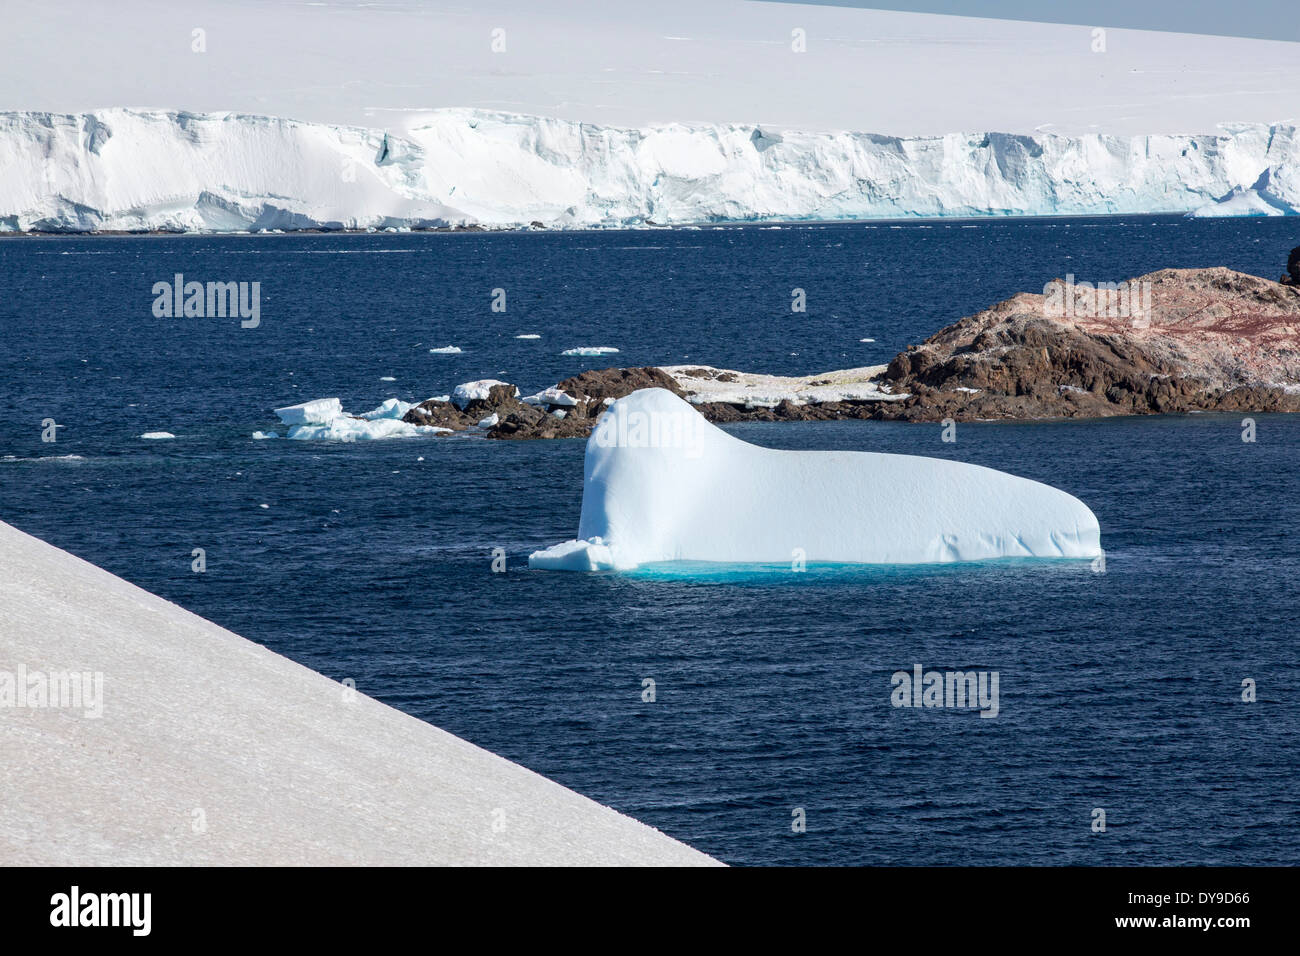 https://c8.alamy.com/comp/DY9D66/a-receding-glacier-in-suspiros-bay-off-joinville-island-just-off-the-DY9D66.jpg